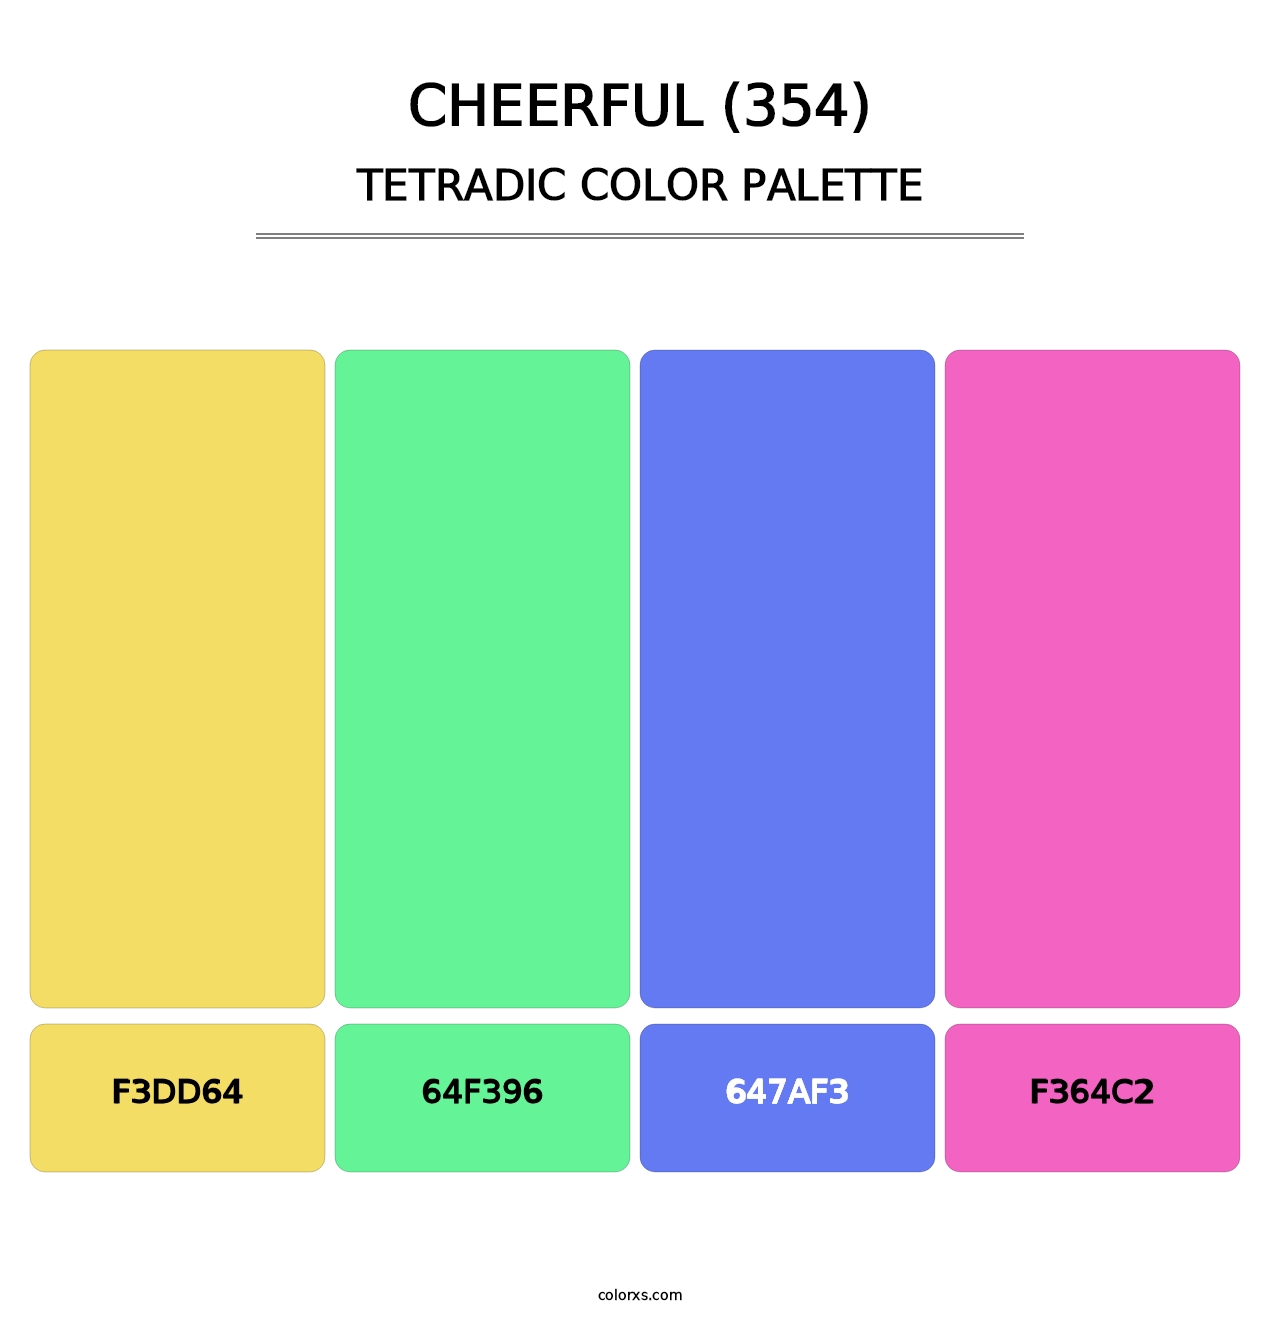 Cheerful (354) - Tetradic Color Palette